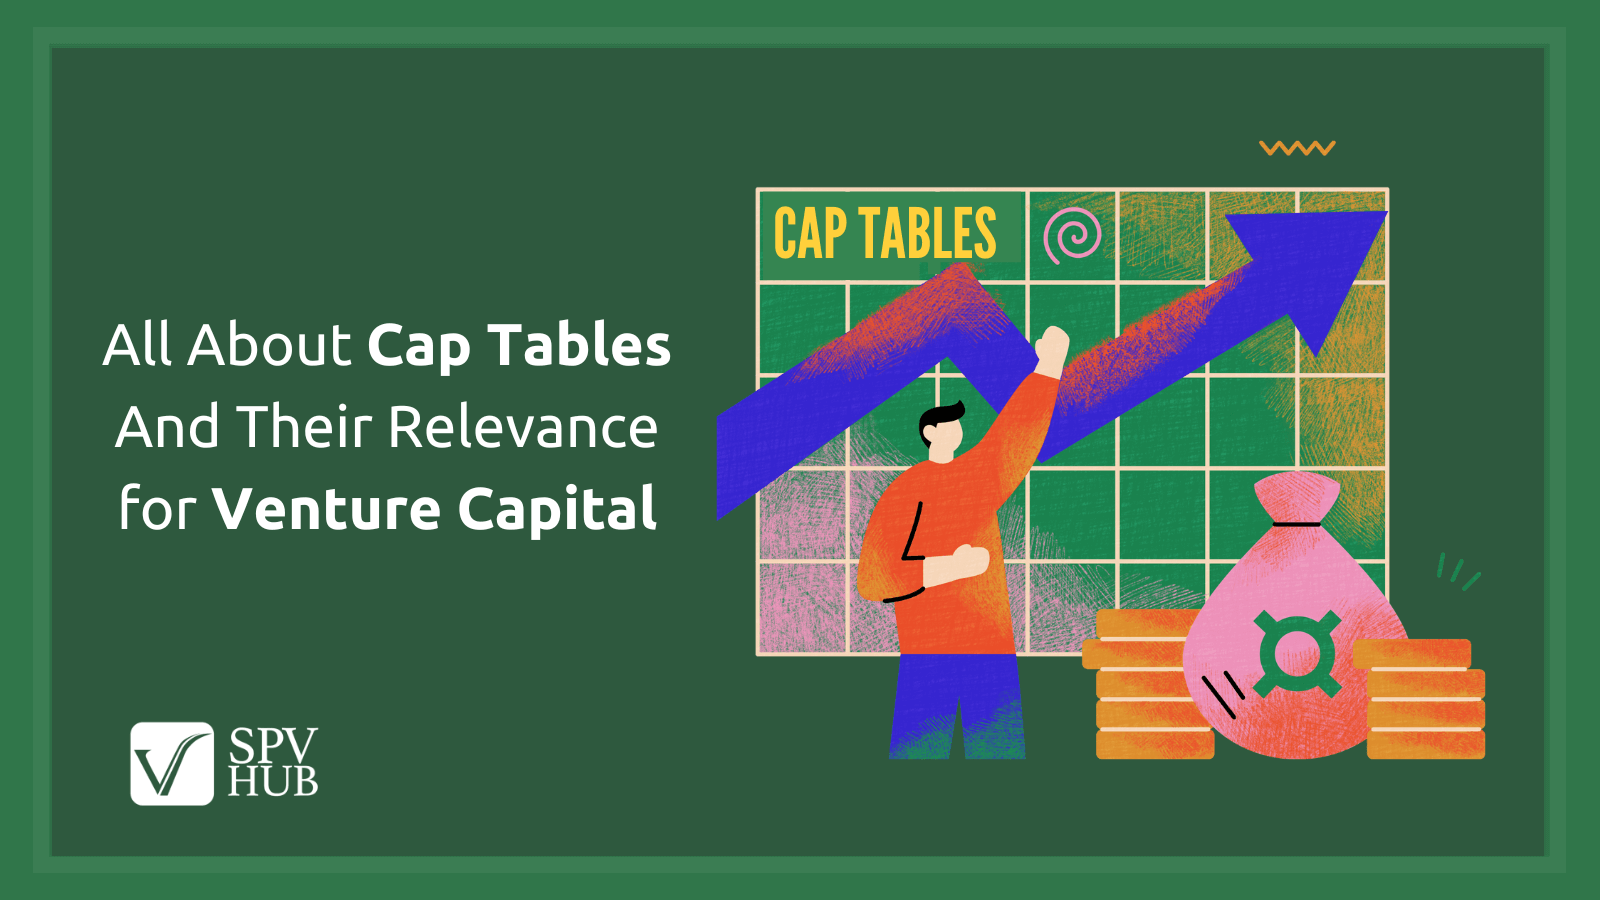 All About Cap Tables And Their Relevance for Venture Capital